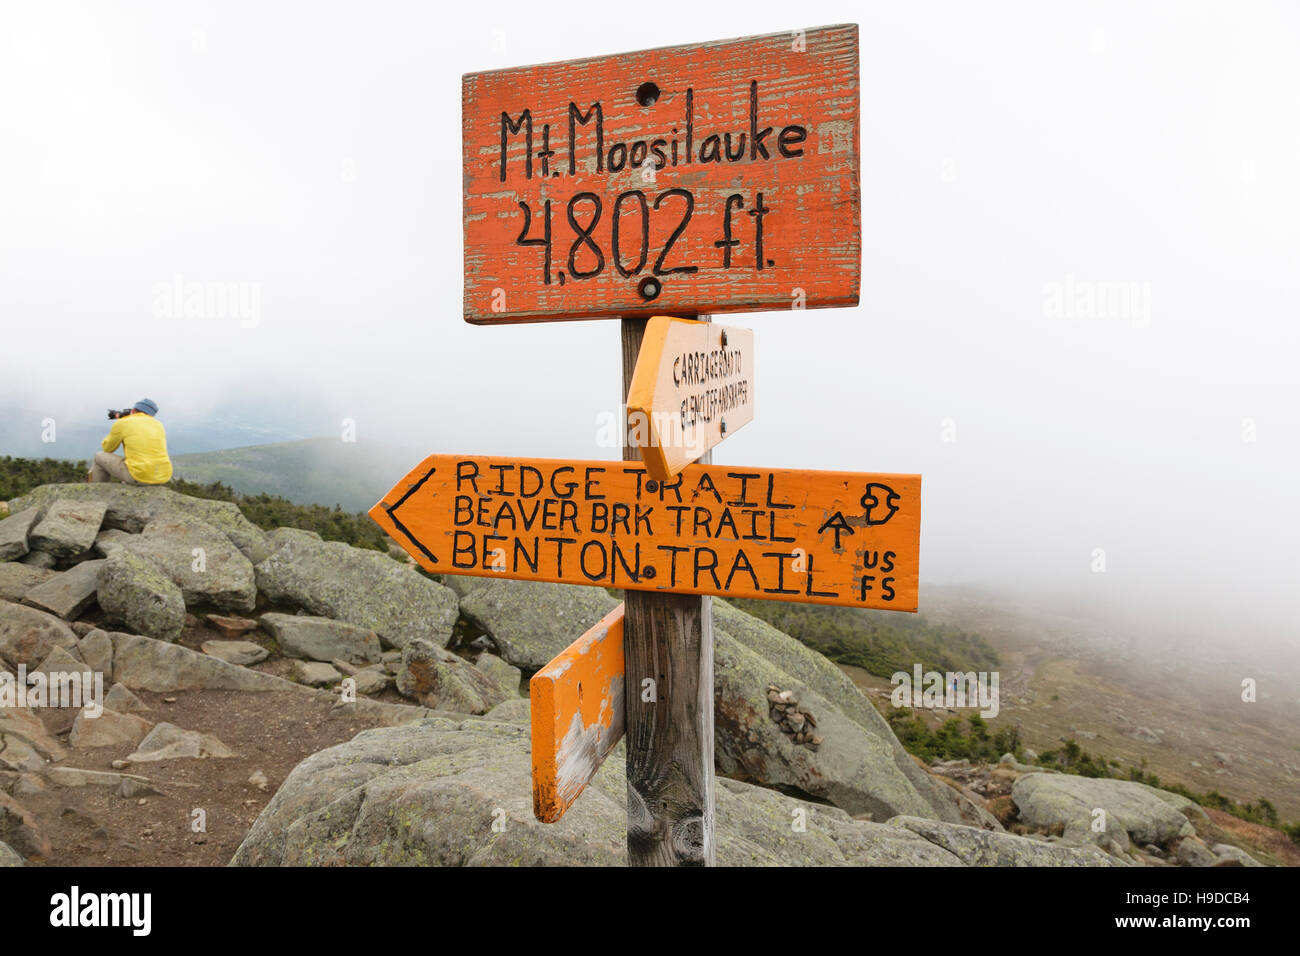 The summit of Mount Moosilauke, in Benton, New Hampshire USA during the summer months on a foggy day Stock Photo